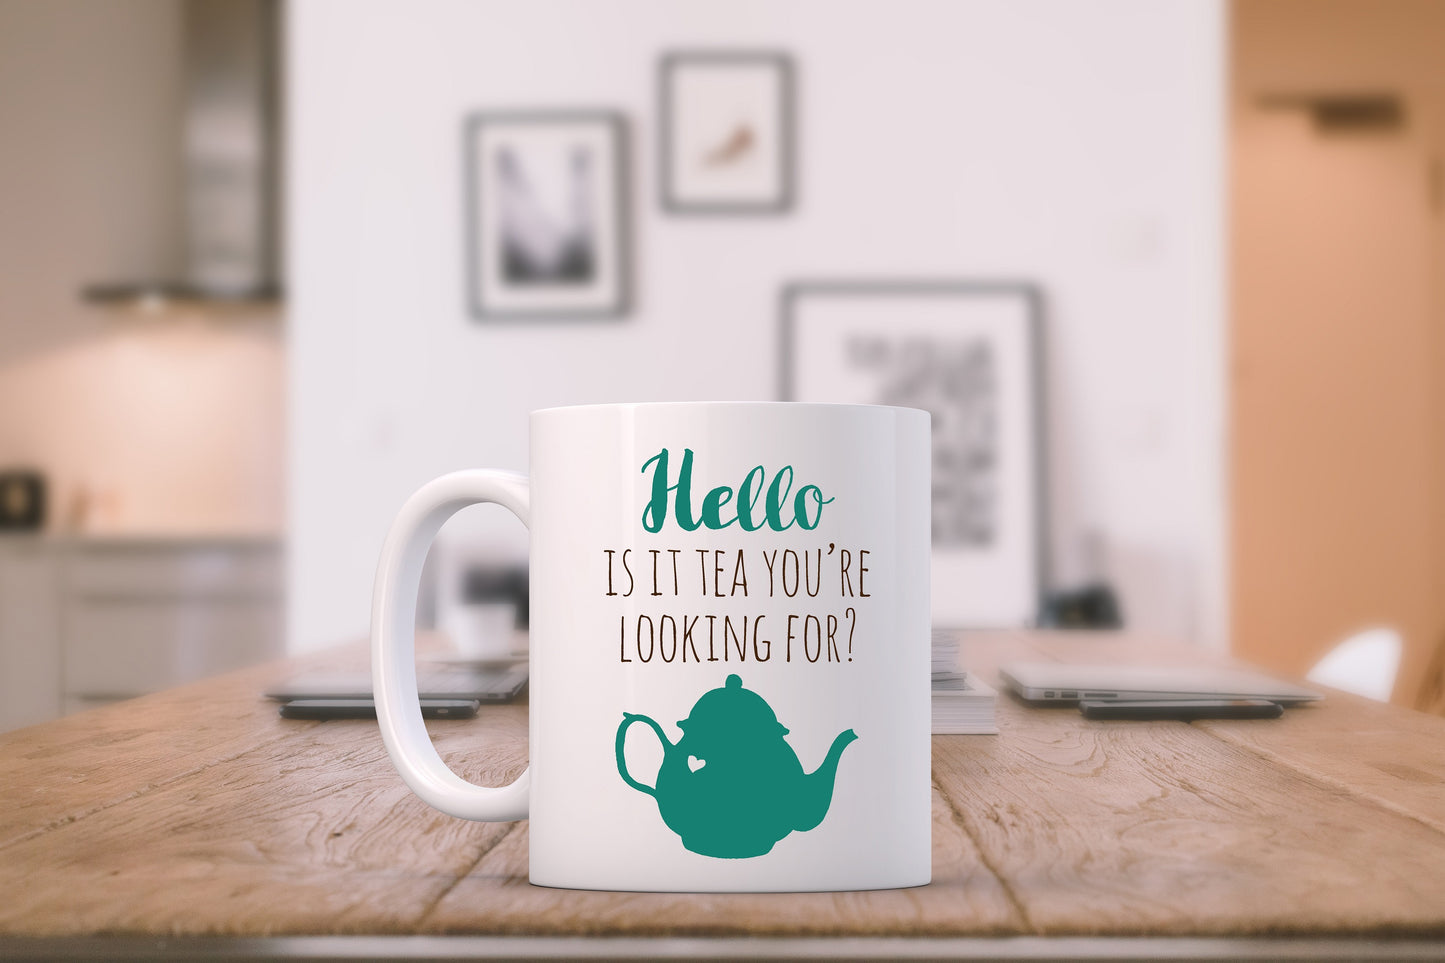 SALE - Hello Is It Tea You're Looking For? - 11oz Ceramic Mug